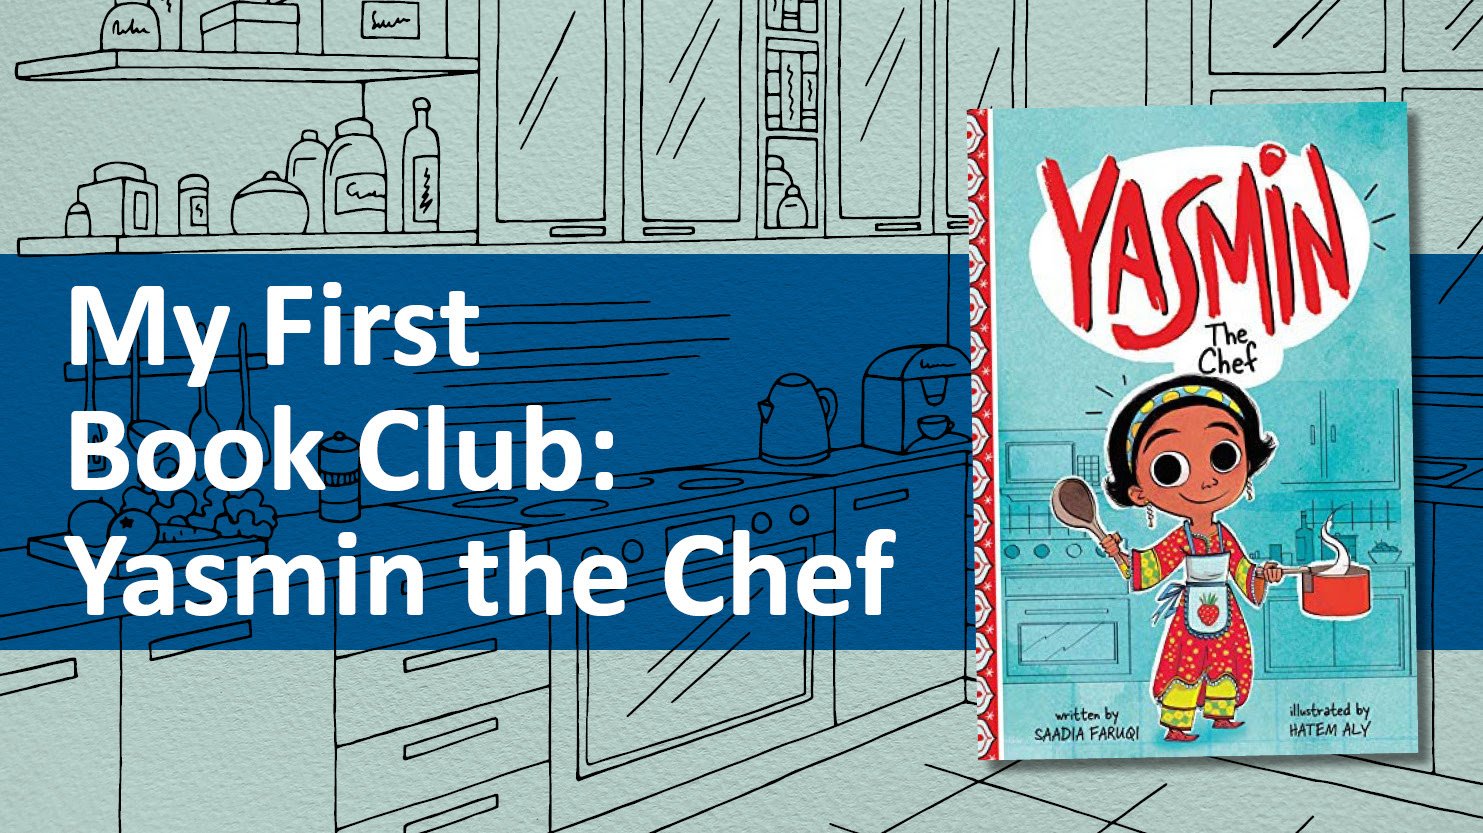 A book cover called YASMIN the Chef by Saadia Faruqi White text reads My First Book Club Yasmin the Chef